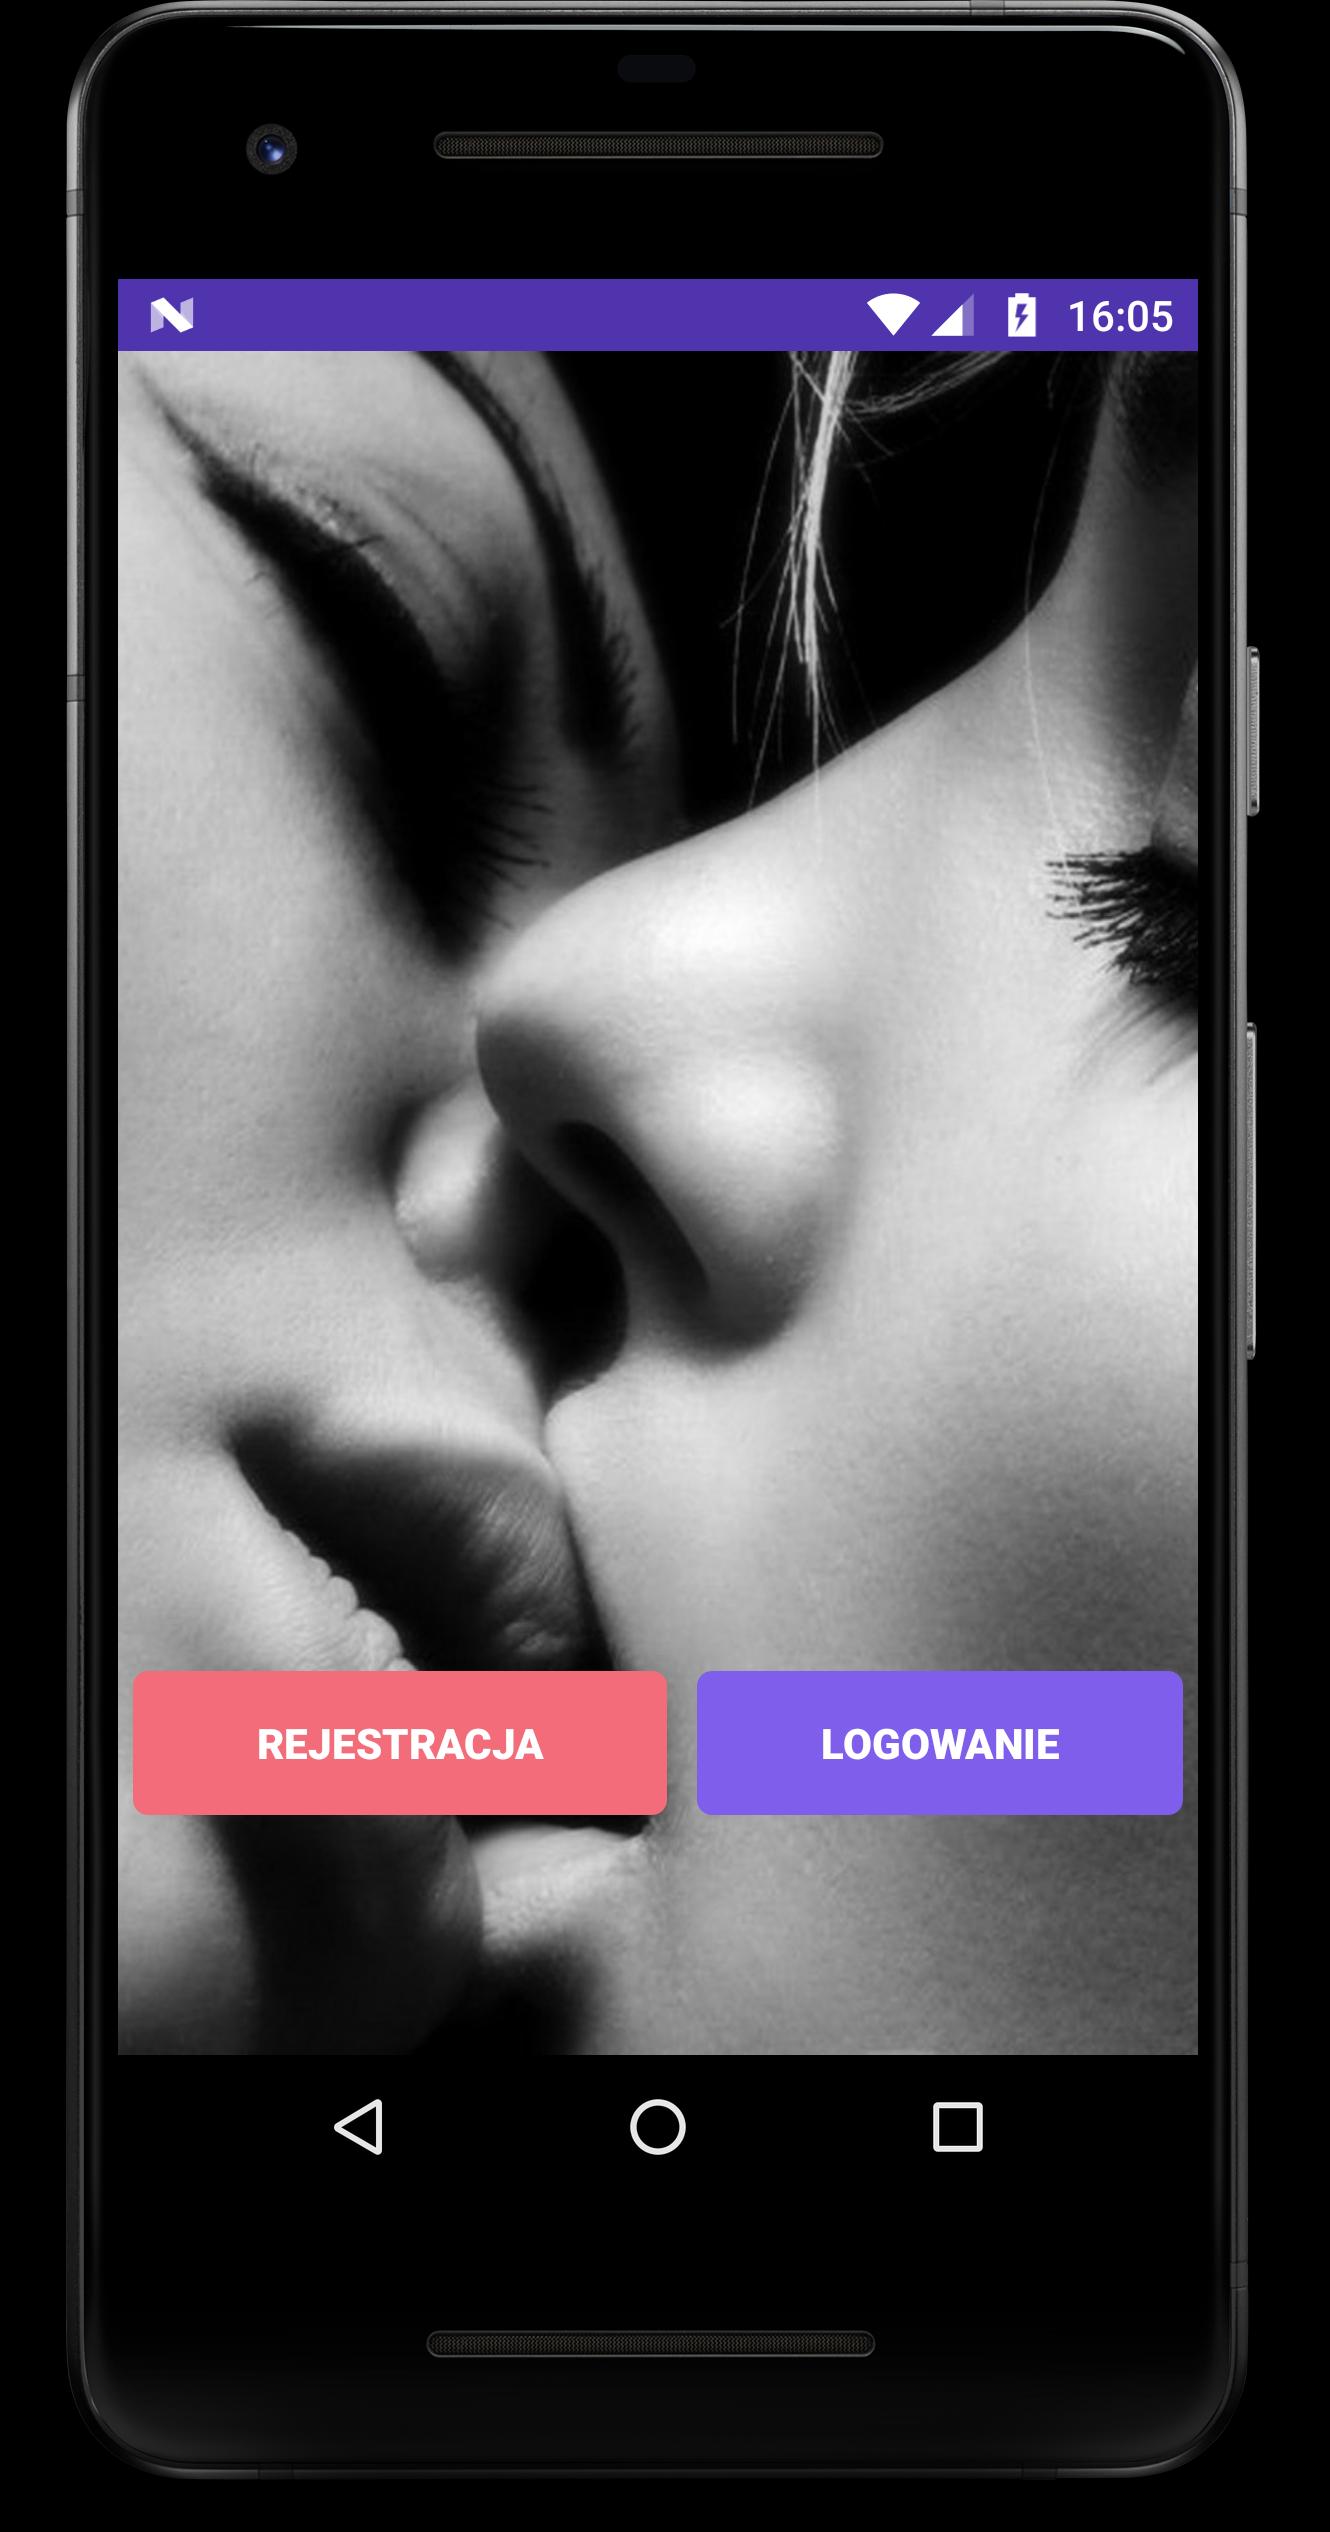 Randki les LGBT for Android - APK Download